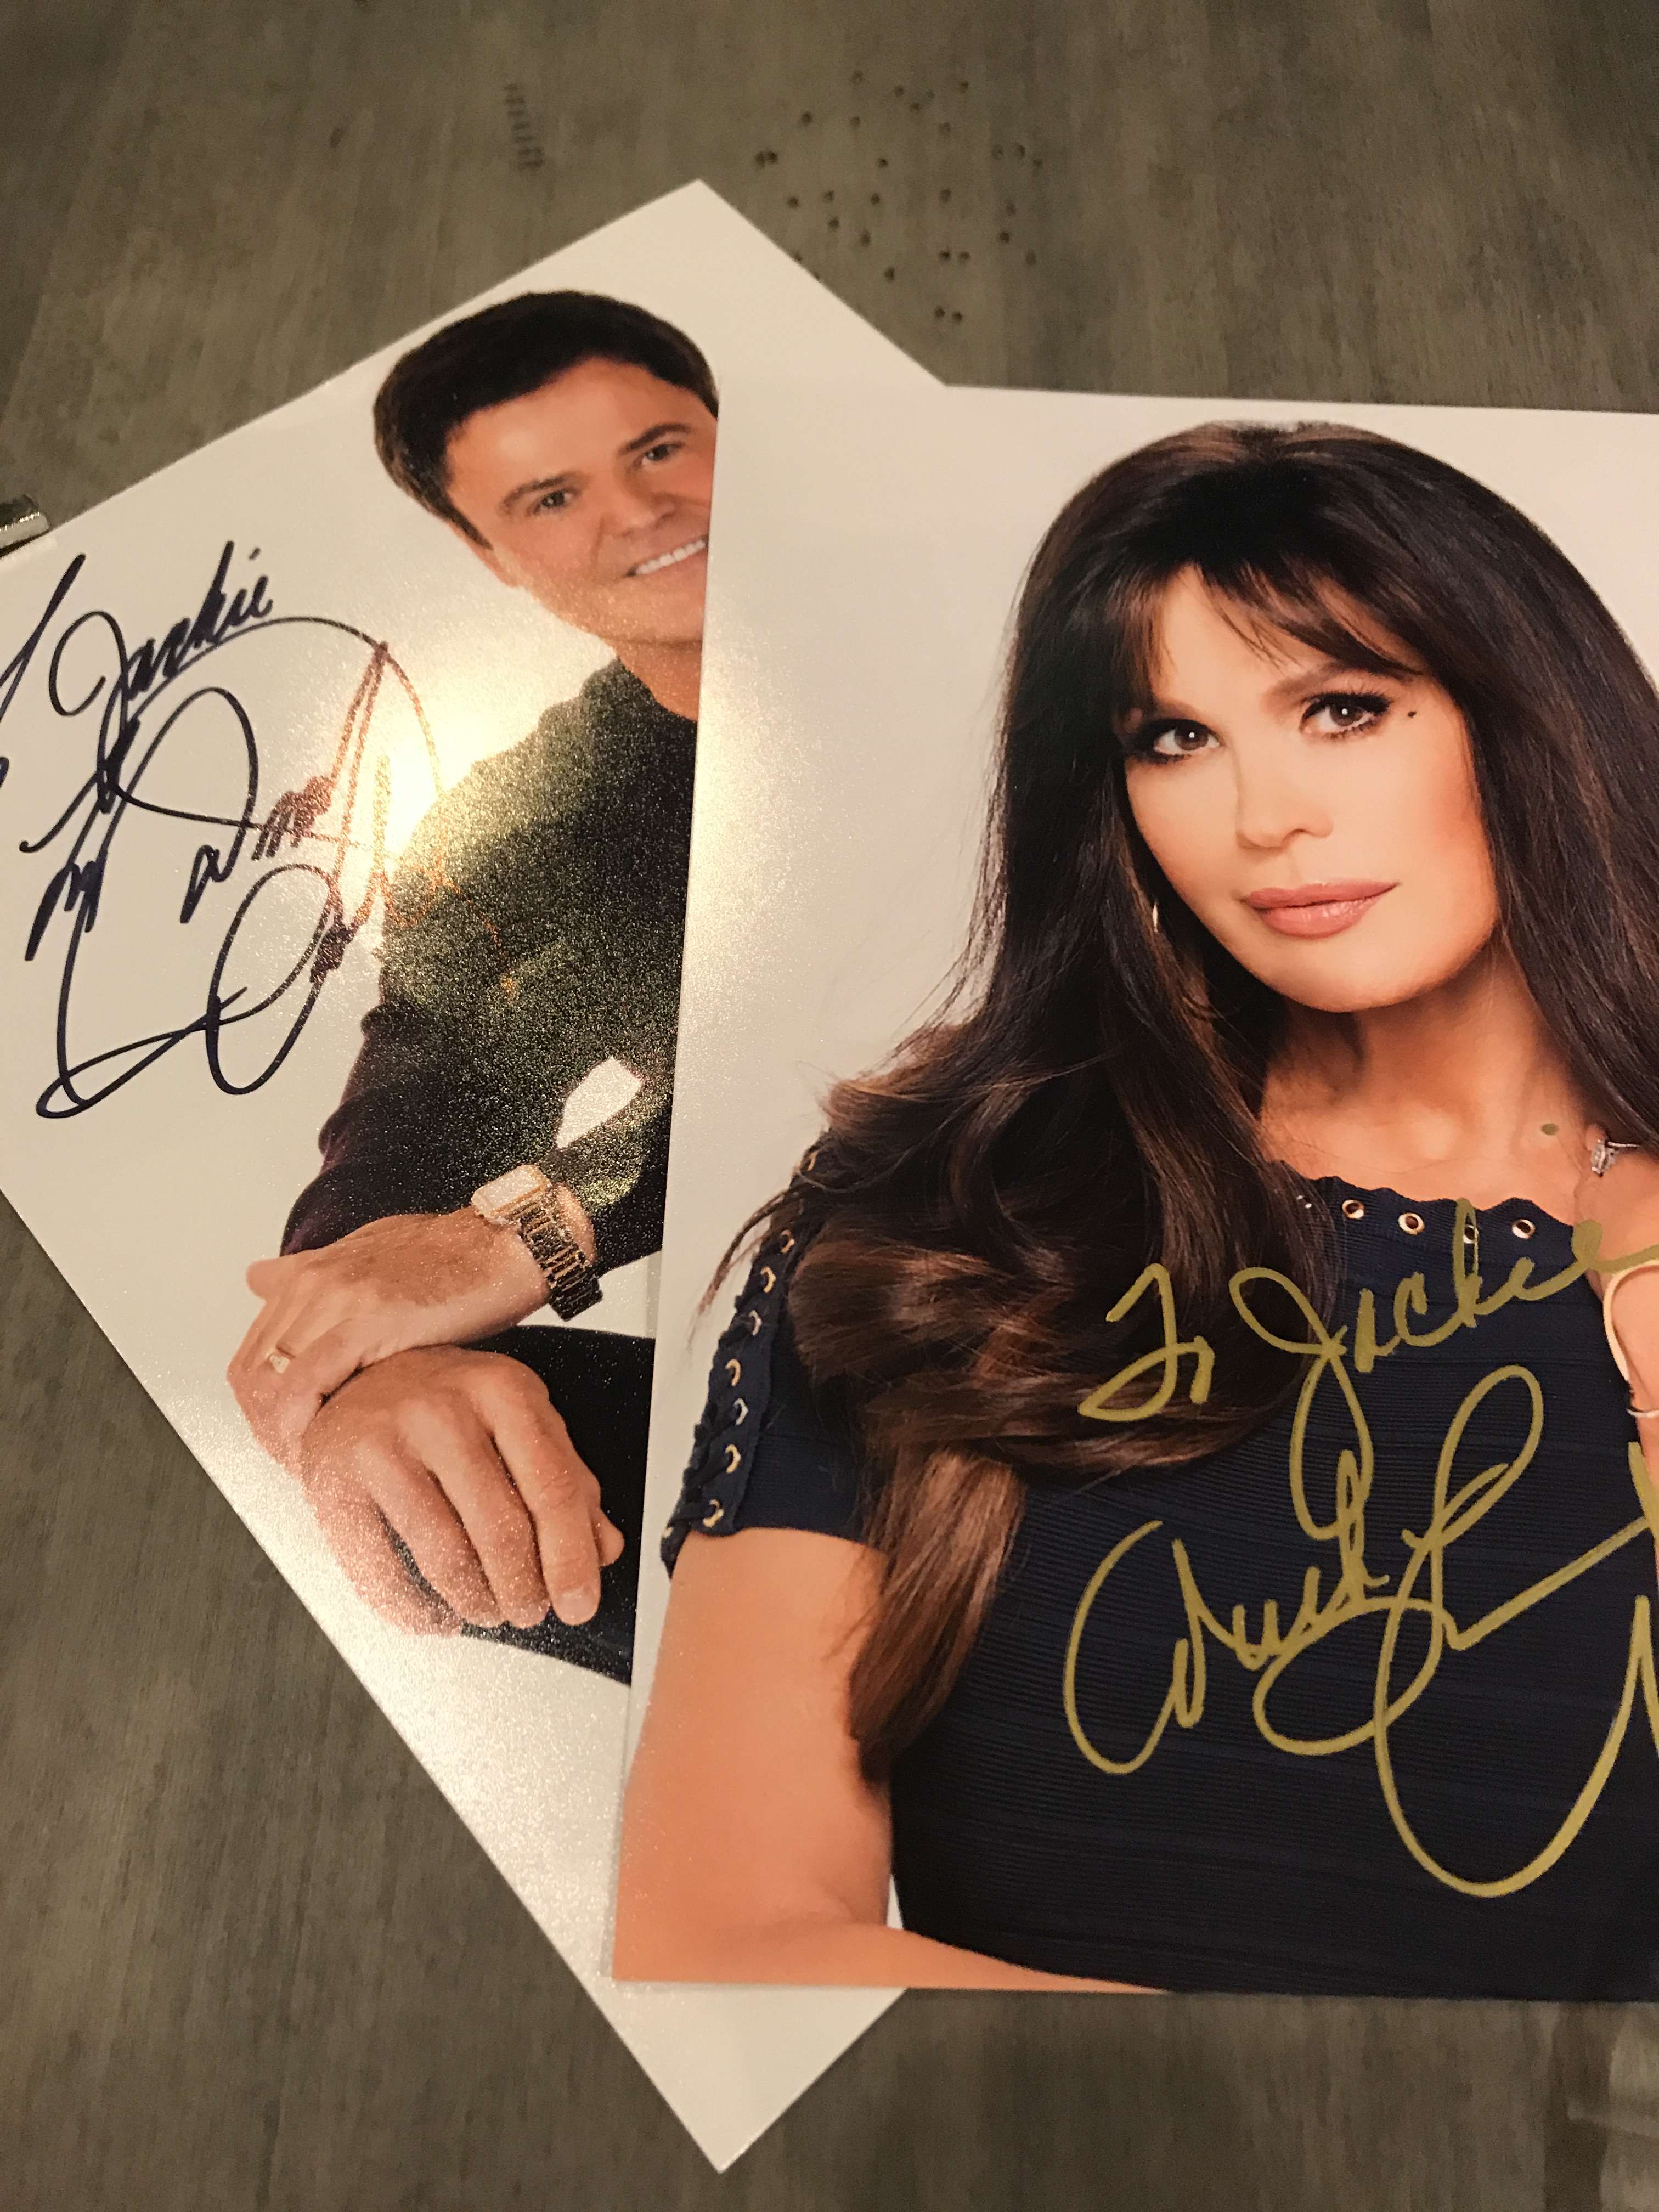 Donny & Marie Osmond Live in Las Vegas | 10 things you mst see and do when in Las Vegas | Elle Blonde Luxury Lifestyle Destination & Travel Blog